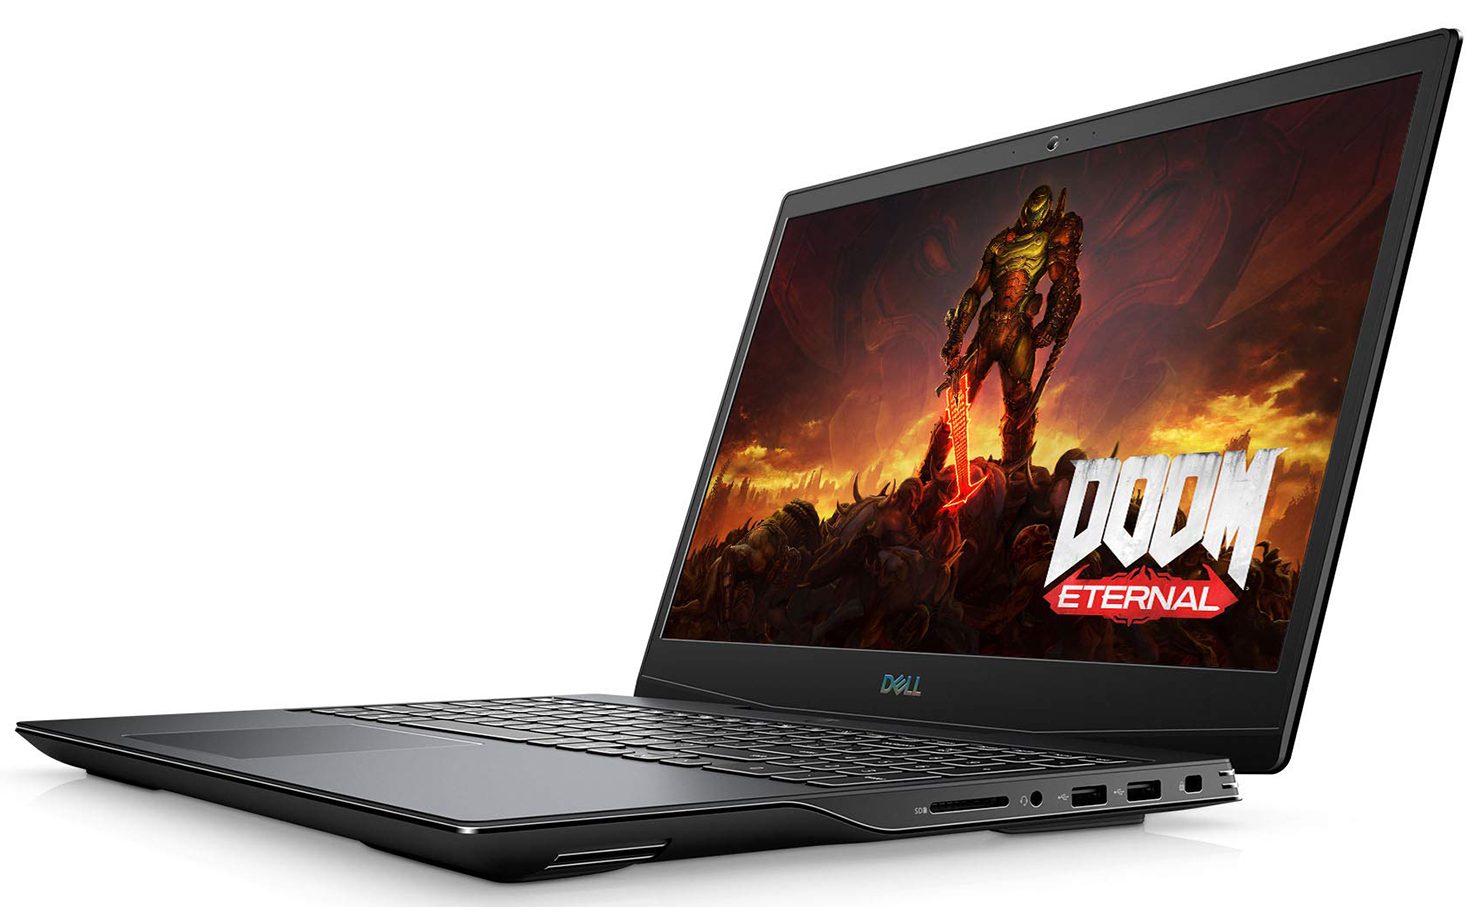 Dell G5 15 (5500) - Specs, Tests, and Prices | LaptopMedia.com